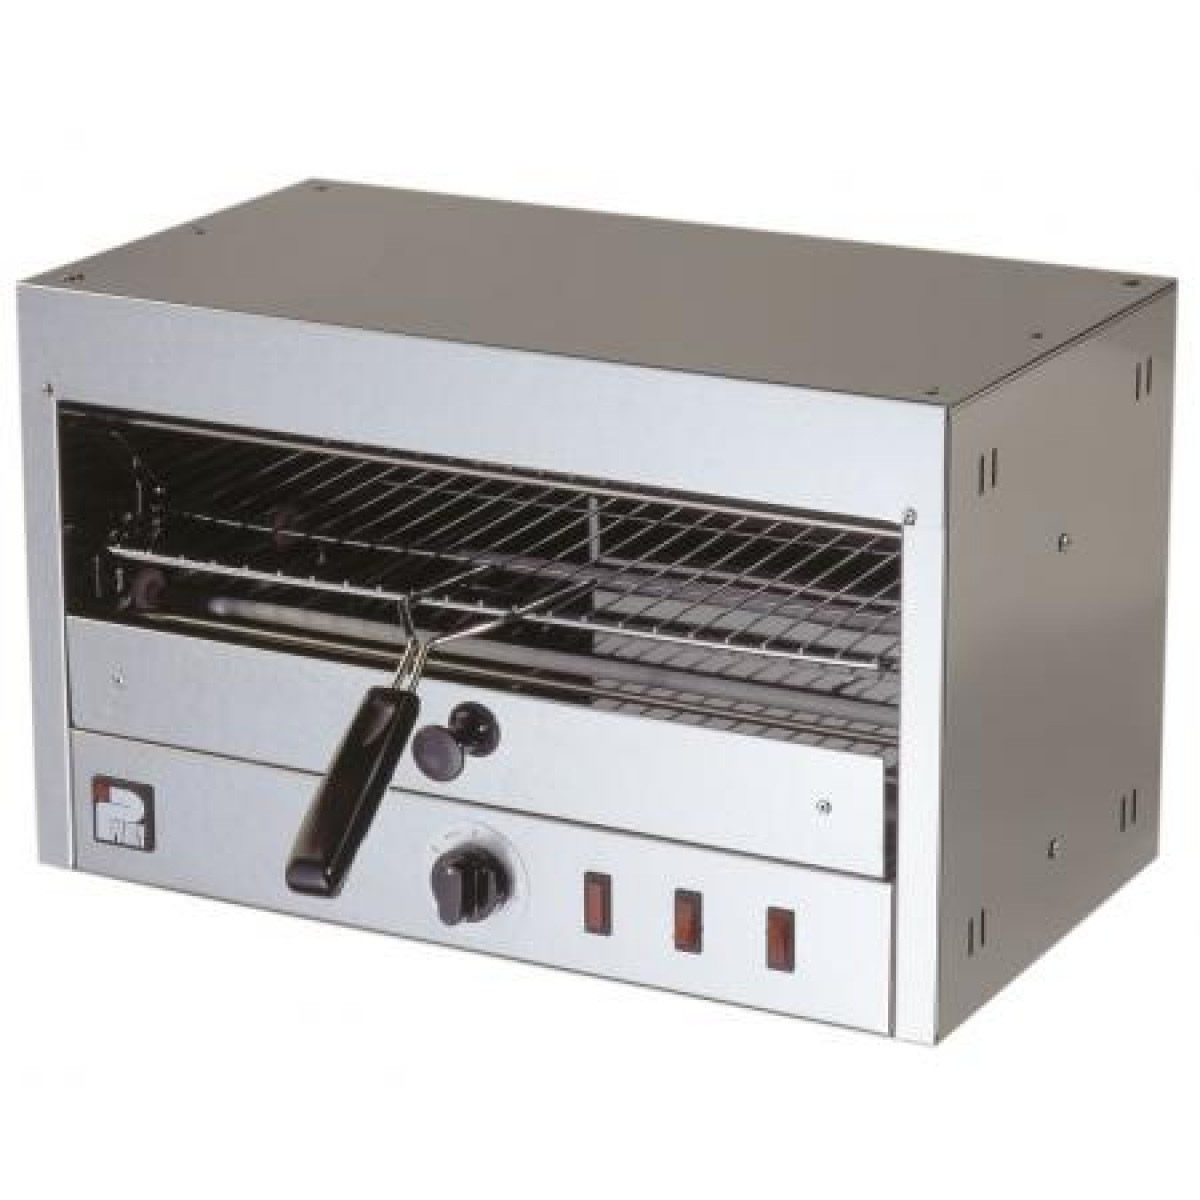 Parry CPG electric pizza grill